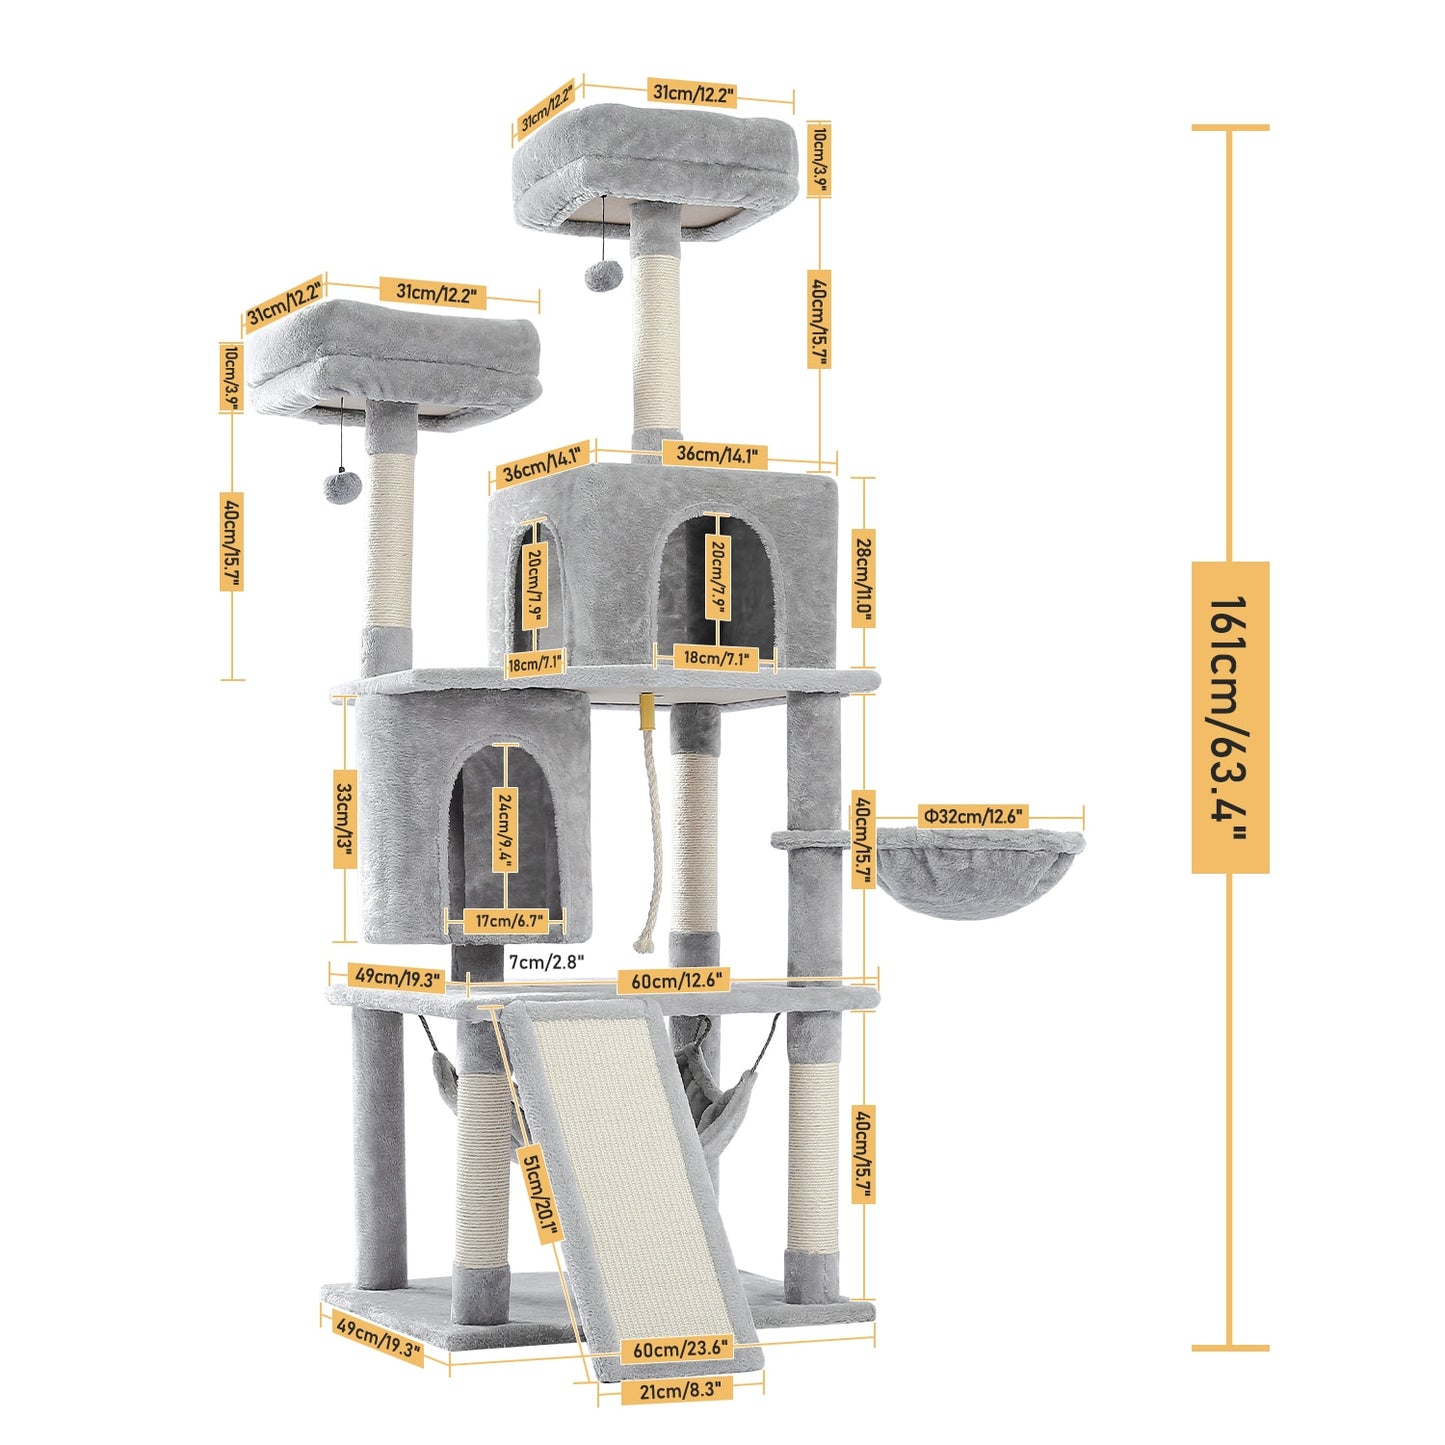 Large Sturdy Cat Tree with Multi-Level Cat Condos with Sisal Poles/Hammock